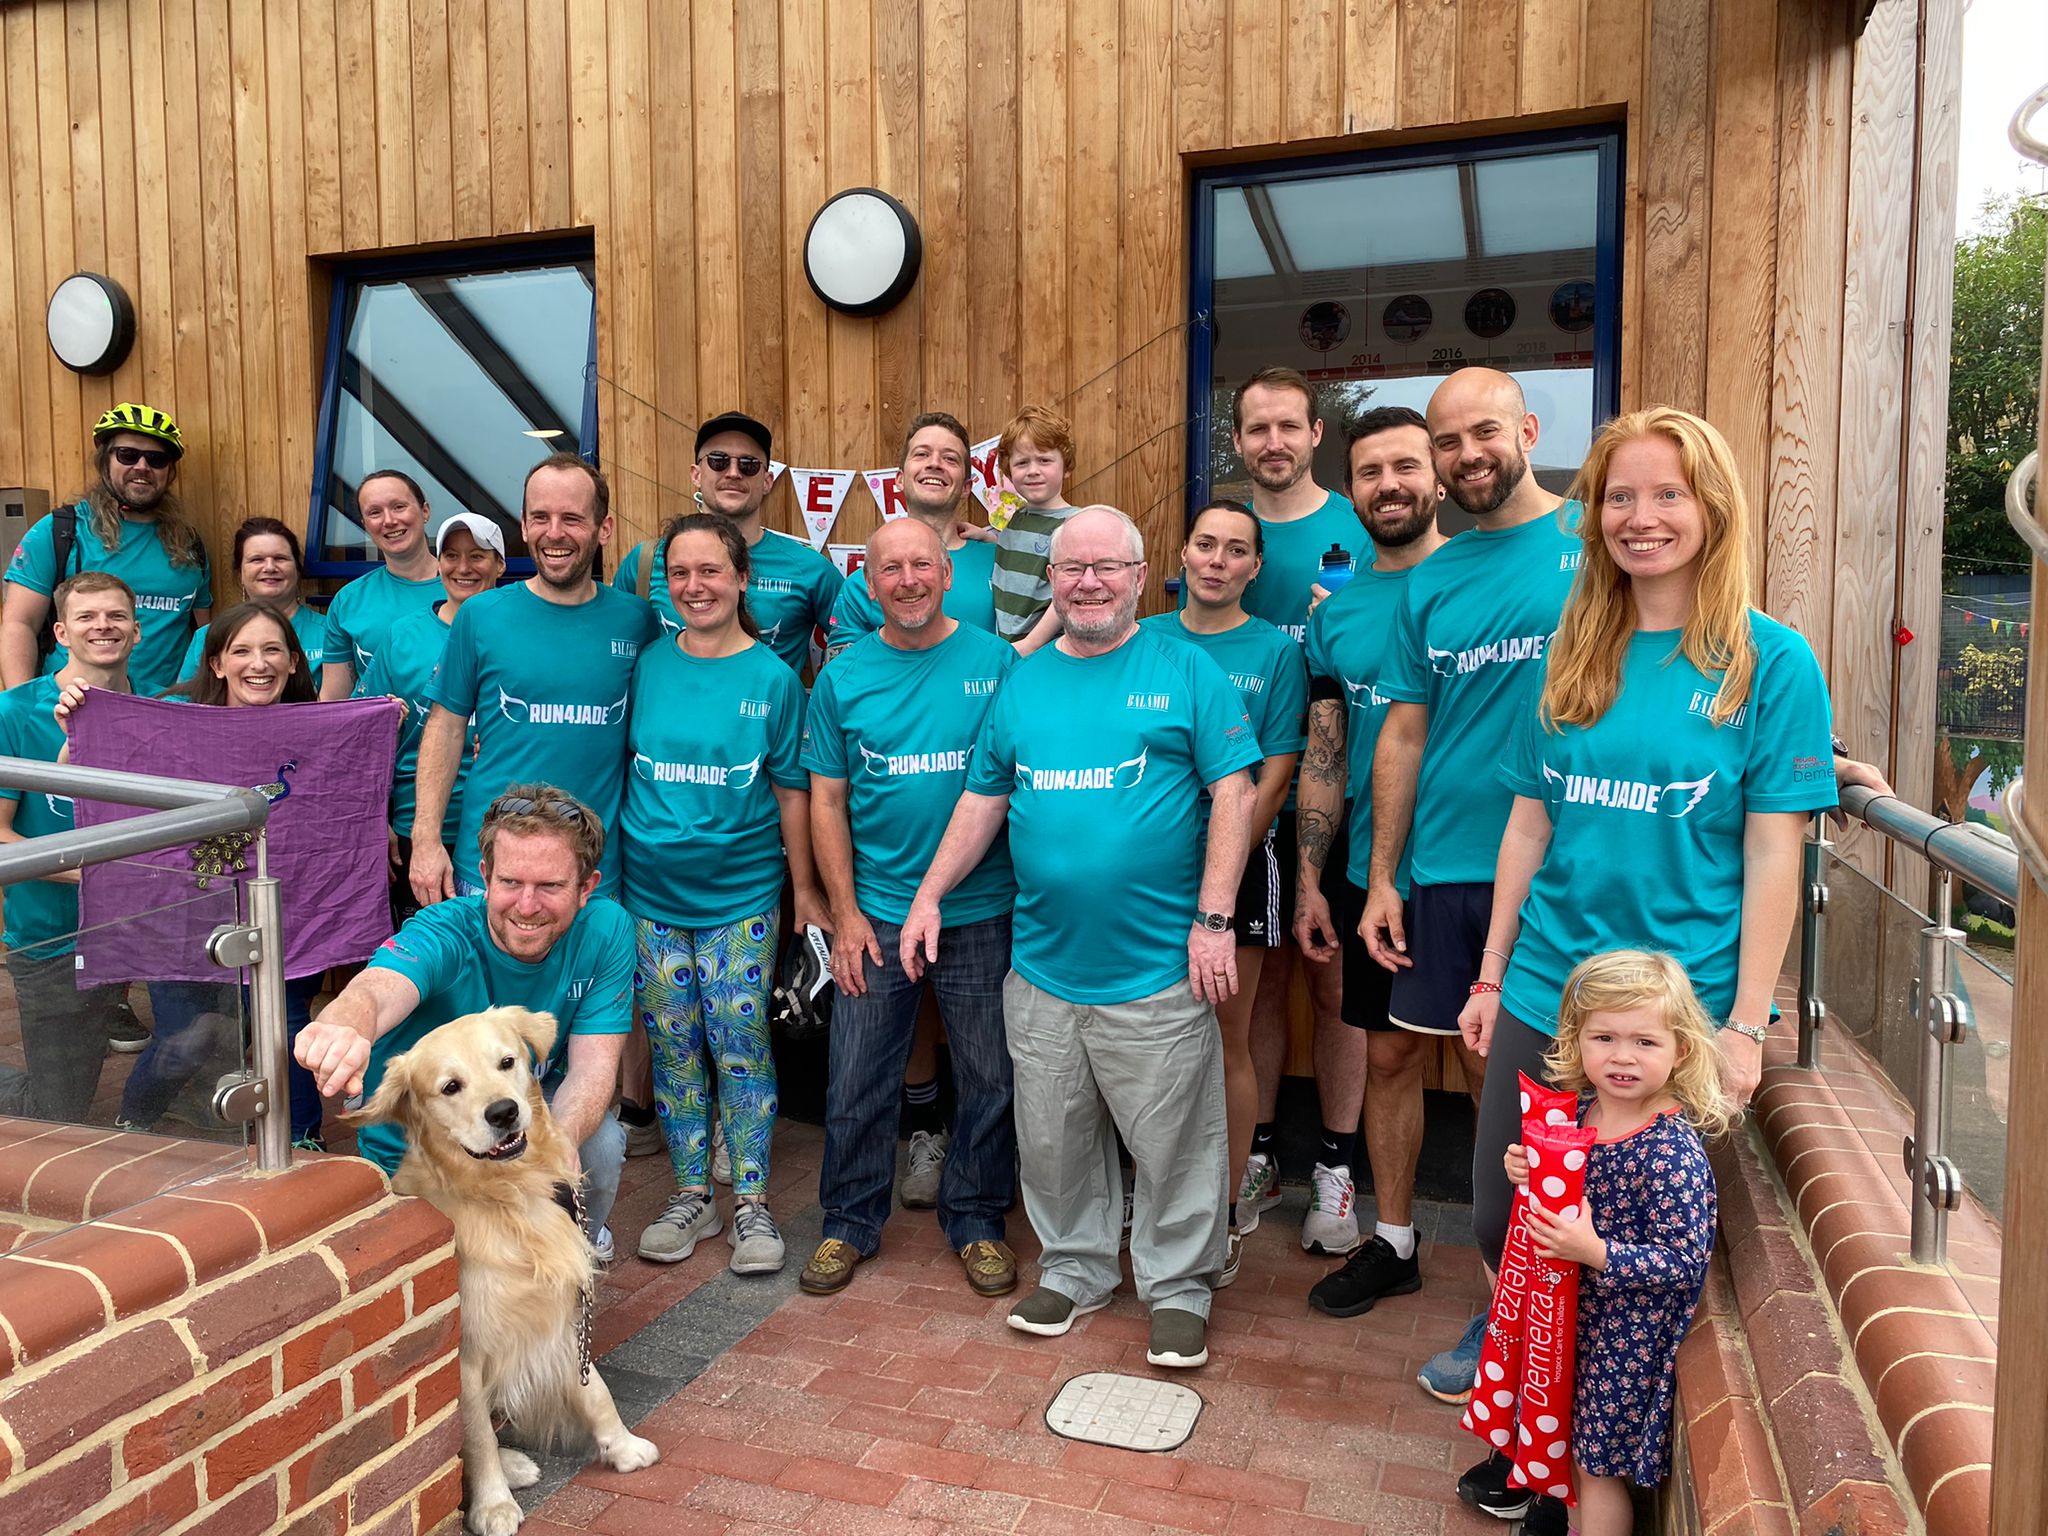 A team of fundraisers stand together outside Demelza's Eltham hospice, wearing matching teal 'Running 4 Jade' t-shirts.